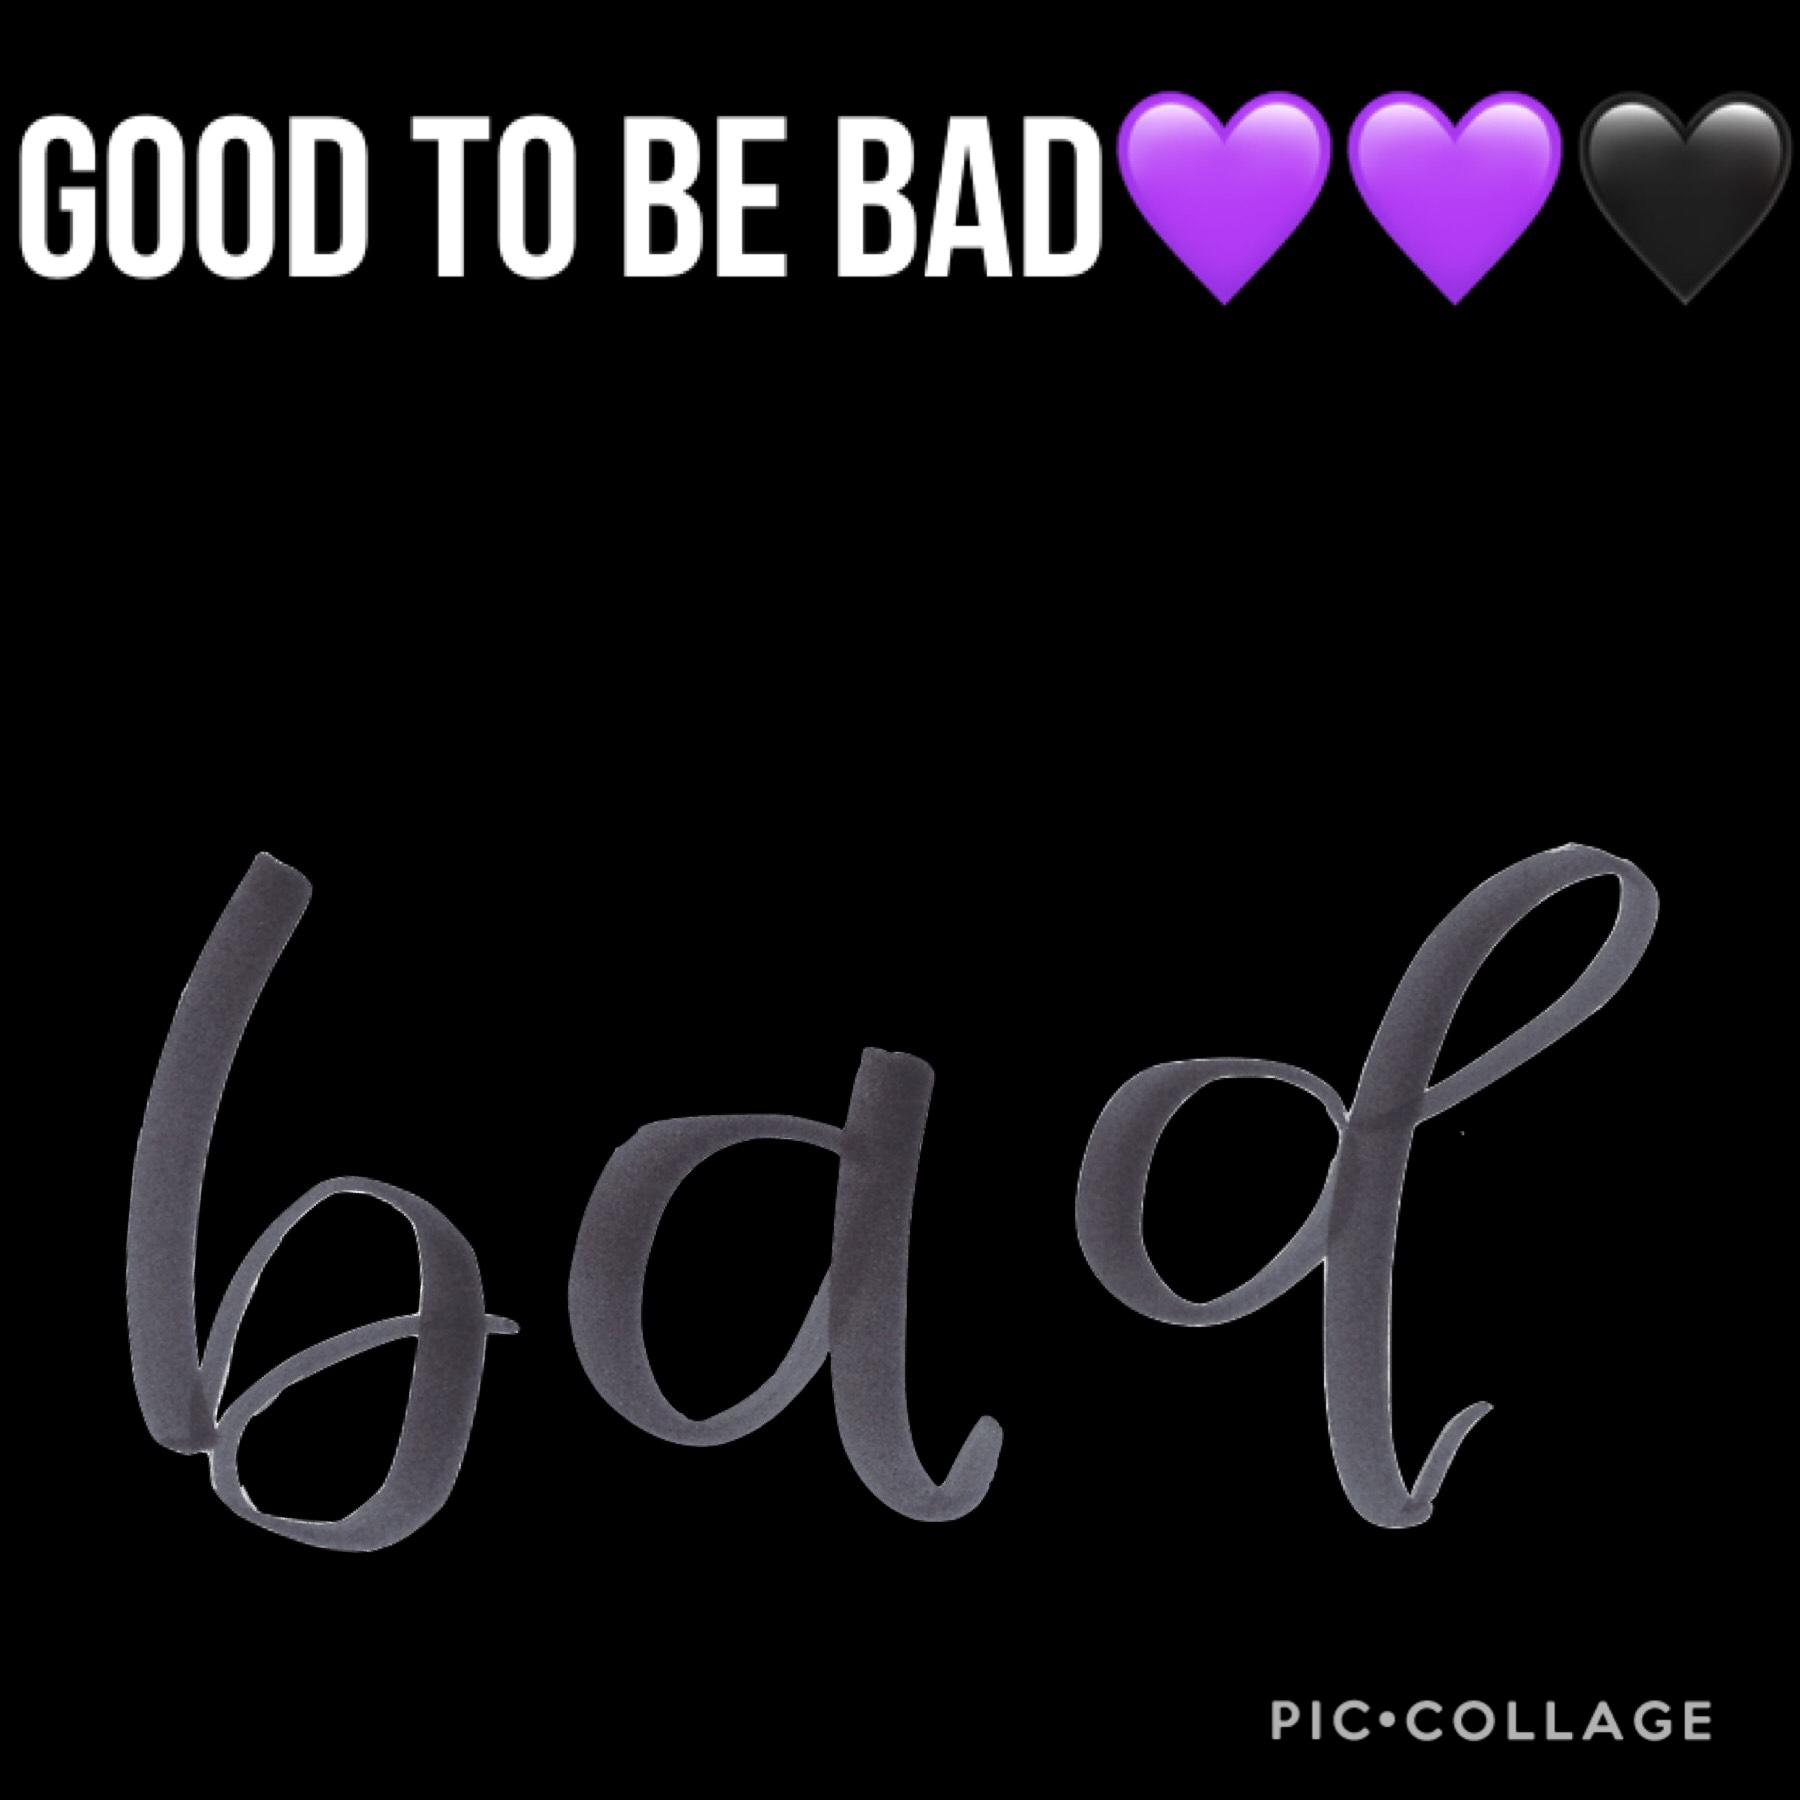 #good to be bad